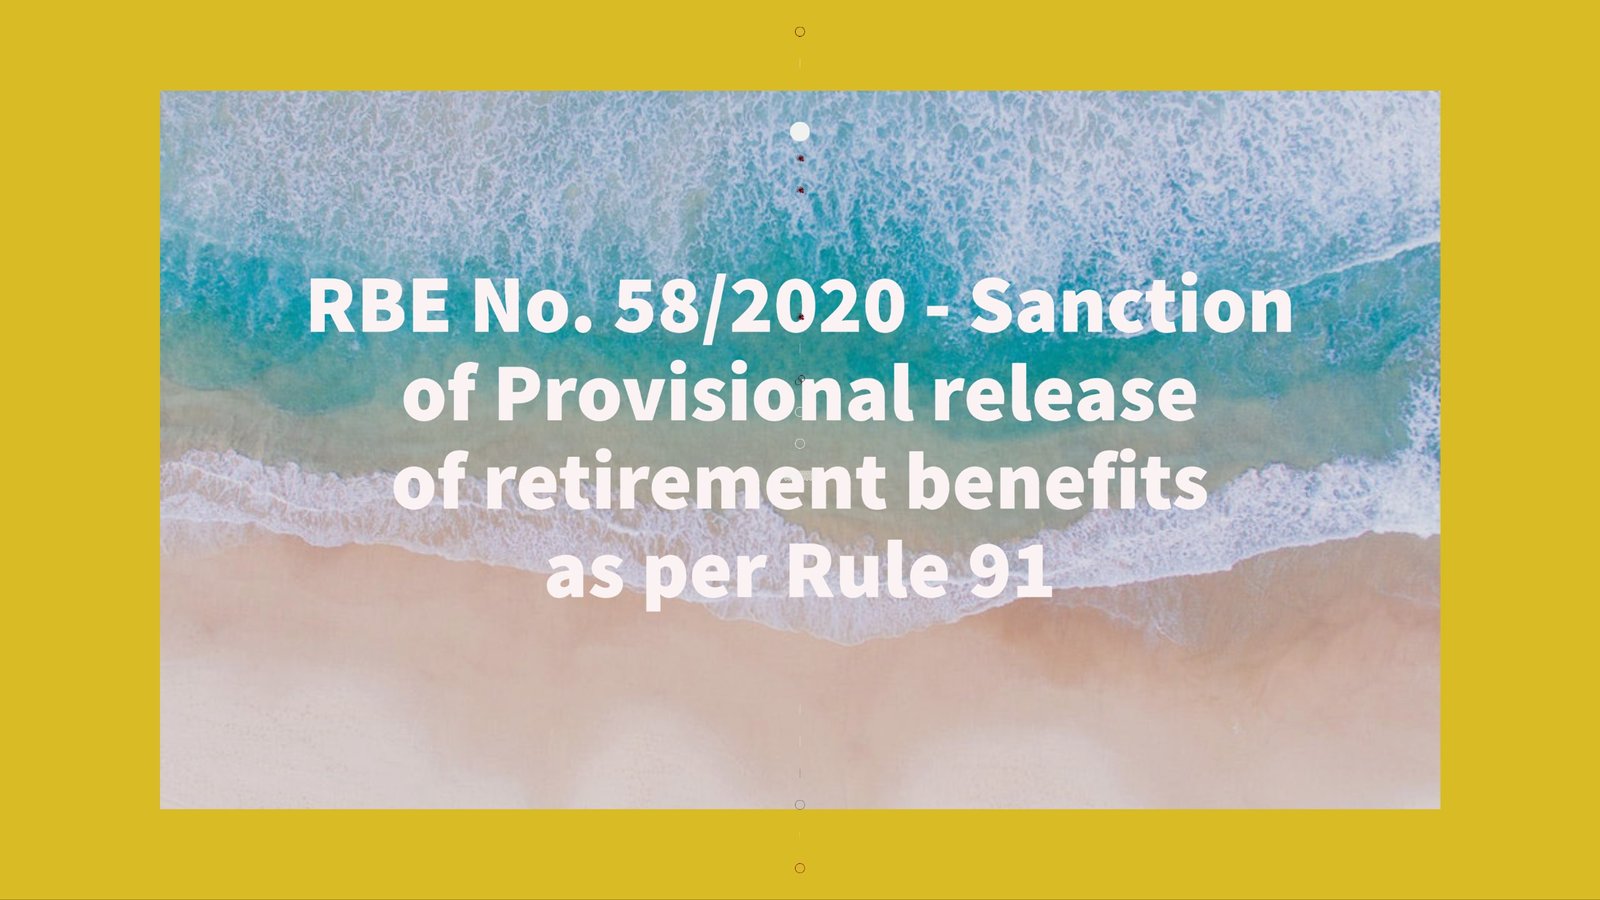 RBE No. 58_2020 - Sanction of Provisional release of retirement benefits as per Rule 91